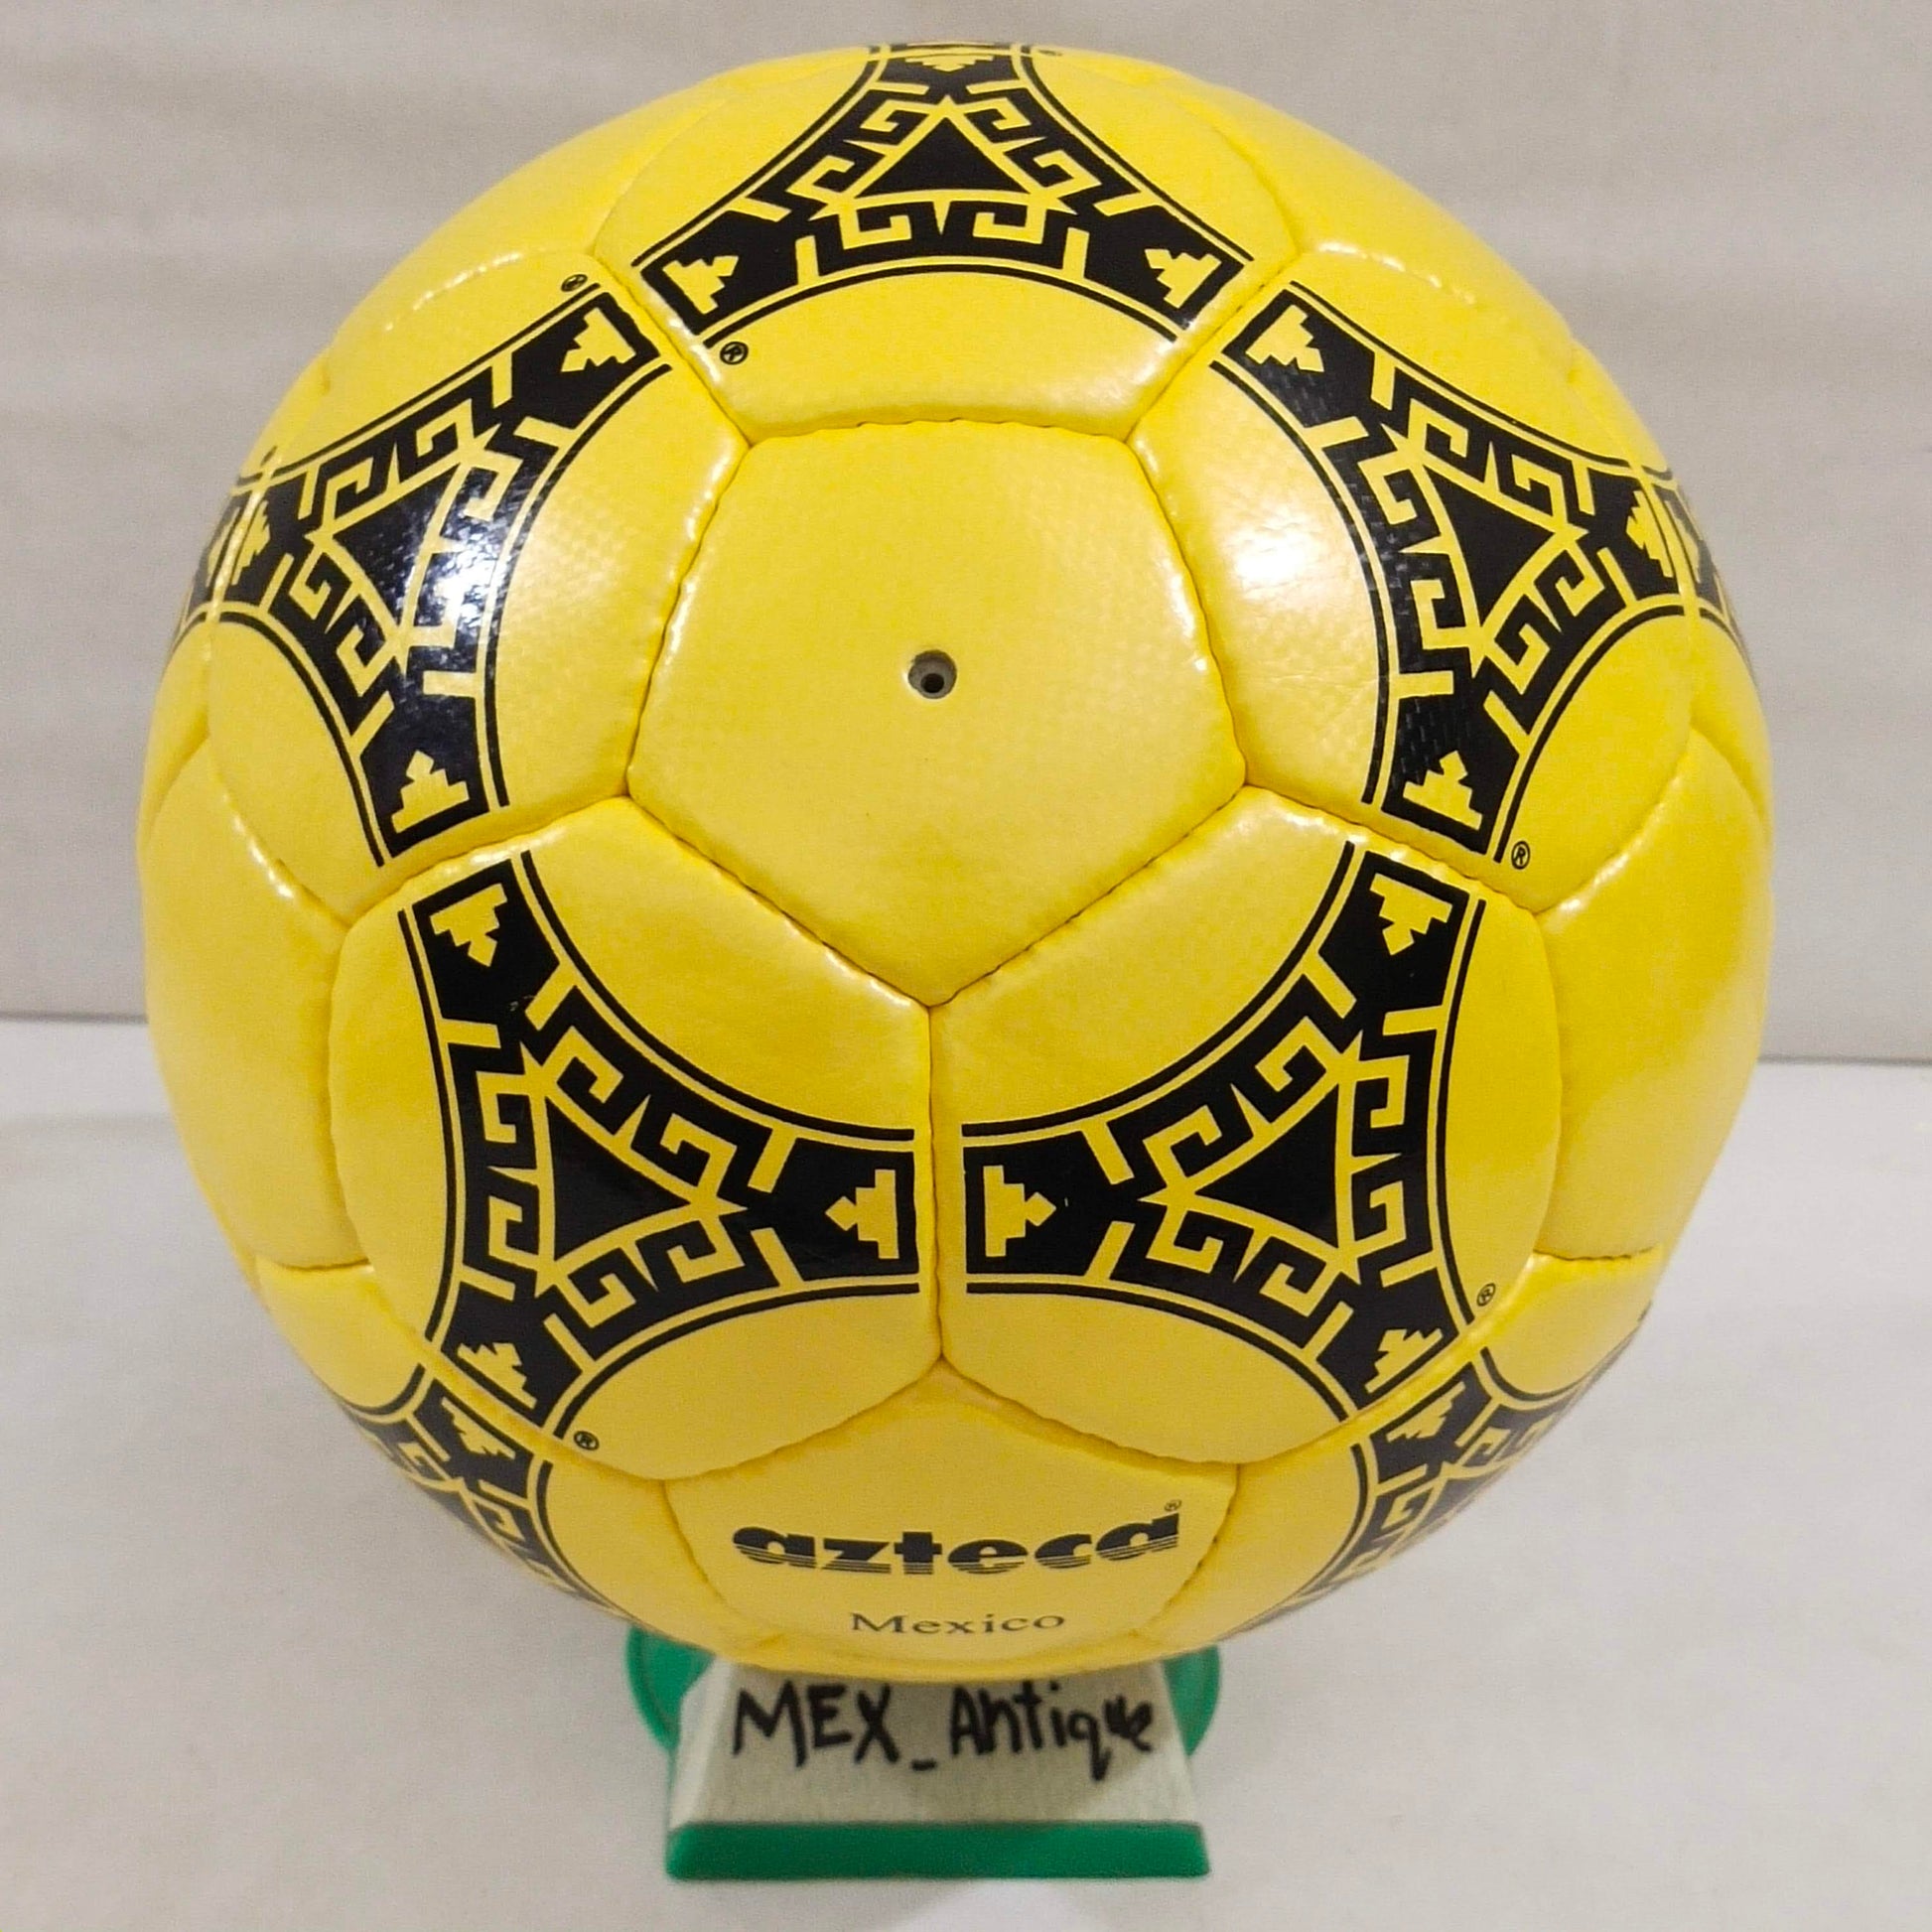 Adidas Azteca Mexico | FIFA World Cup 1986 | Yellow Winter Ball l SIZE 5 02